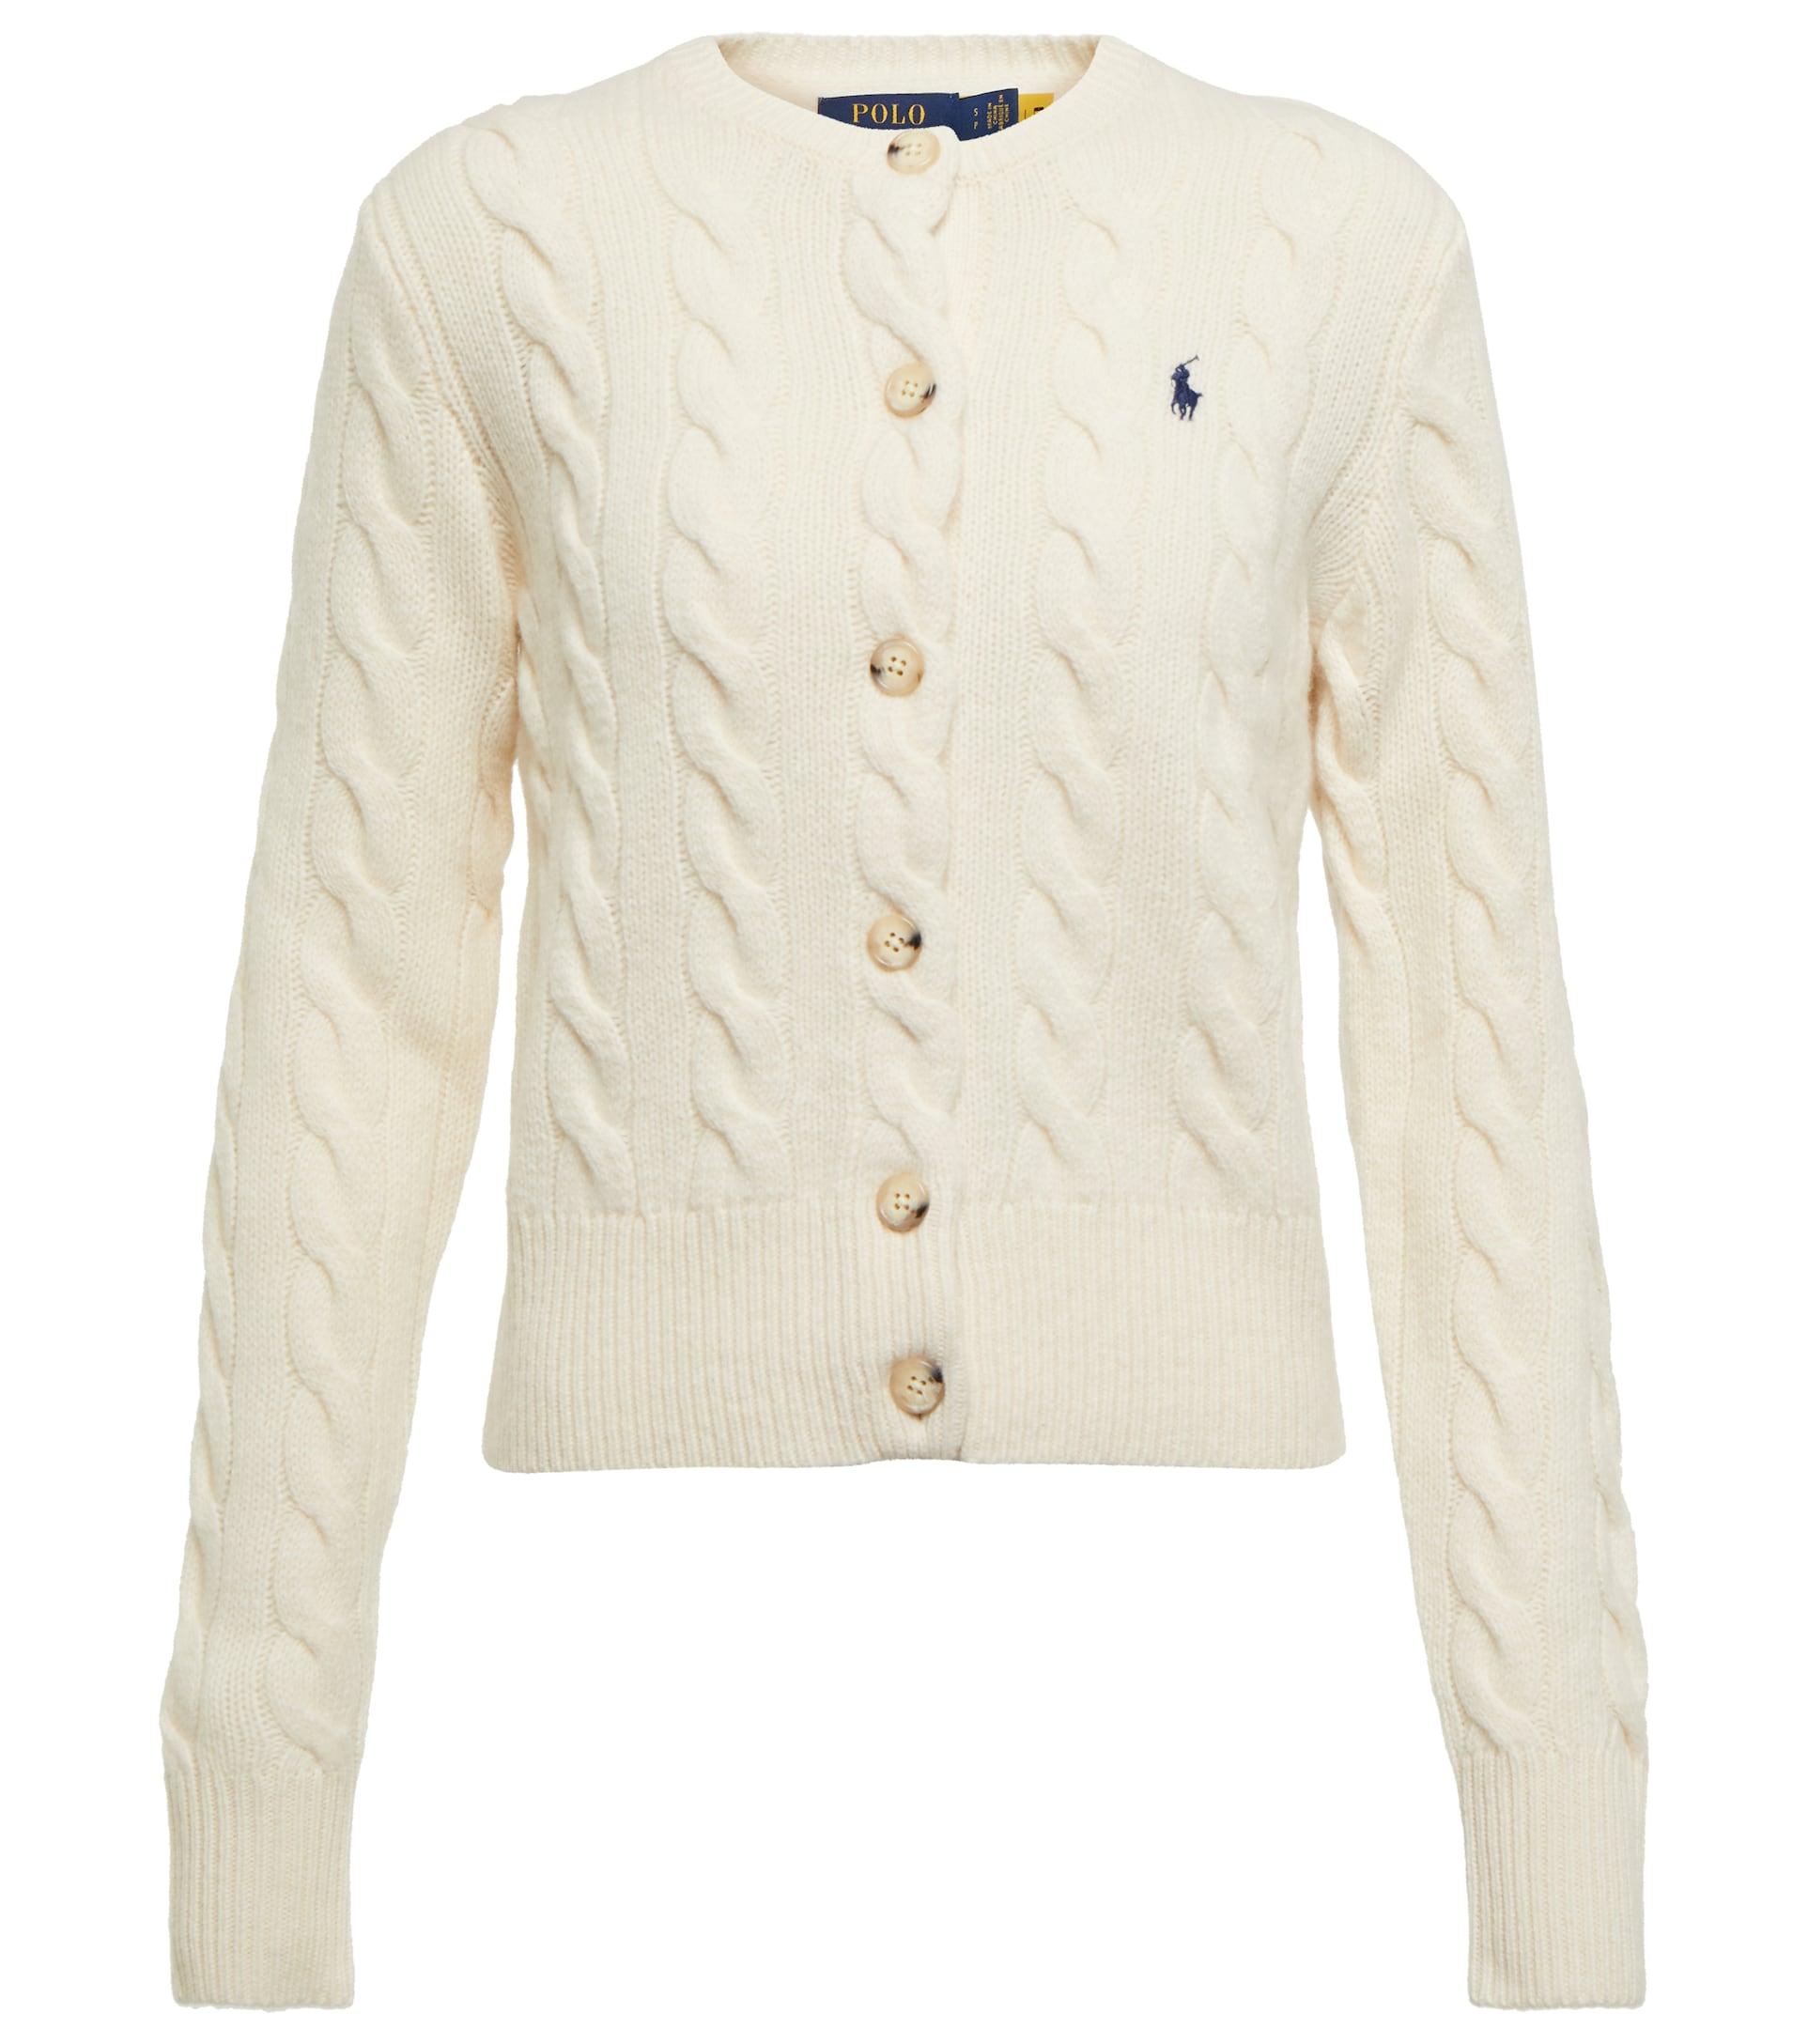 Kruik Intrekking Hoogte Polo Ralph Lauren Cable-knit Wool And Cashmere Cardigan in White | Lyst